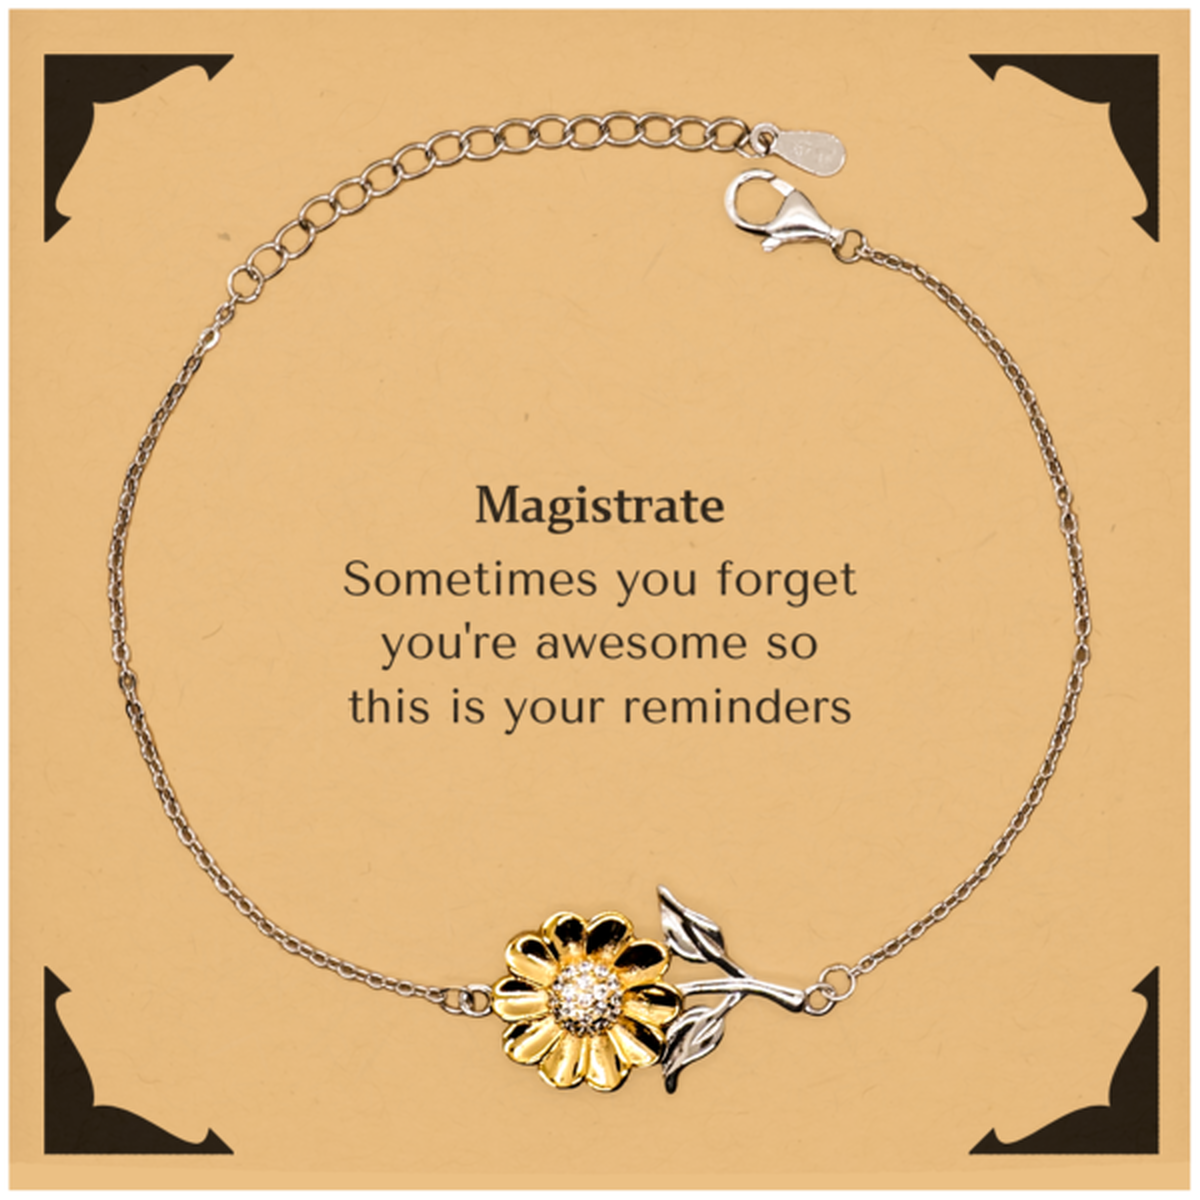 Sentimental Magistrate Sunflower Bracelet, Magistrate Sometimes you forget you're awesome so this is your reminders, Graduation Christmas Birthday Gifts for Magistrate, Men, Women, Coworkers